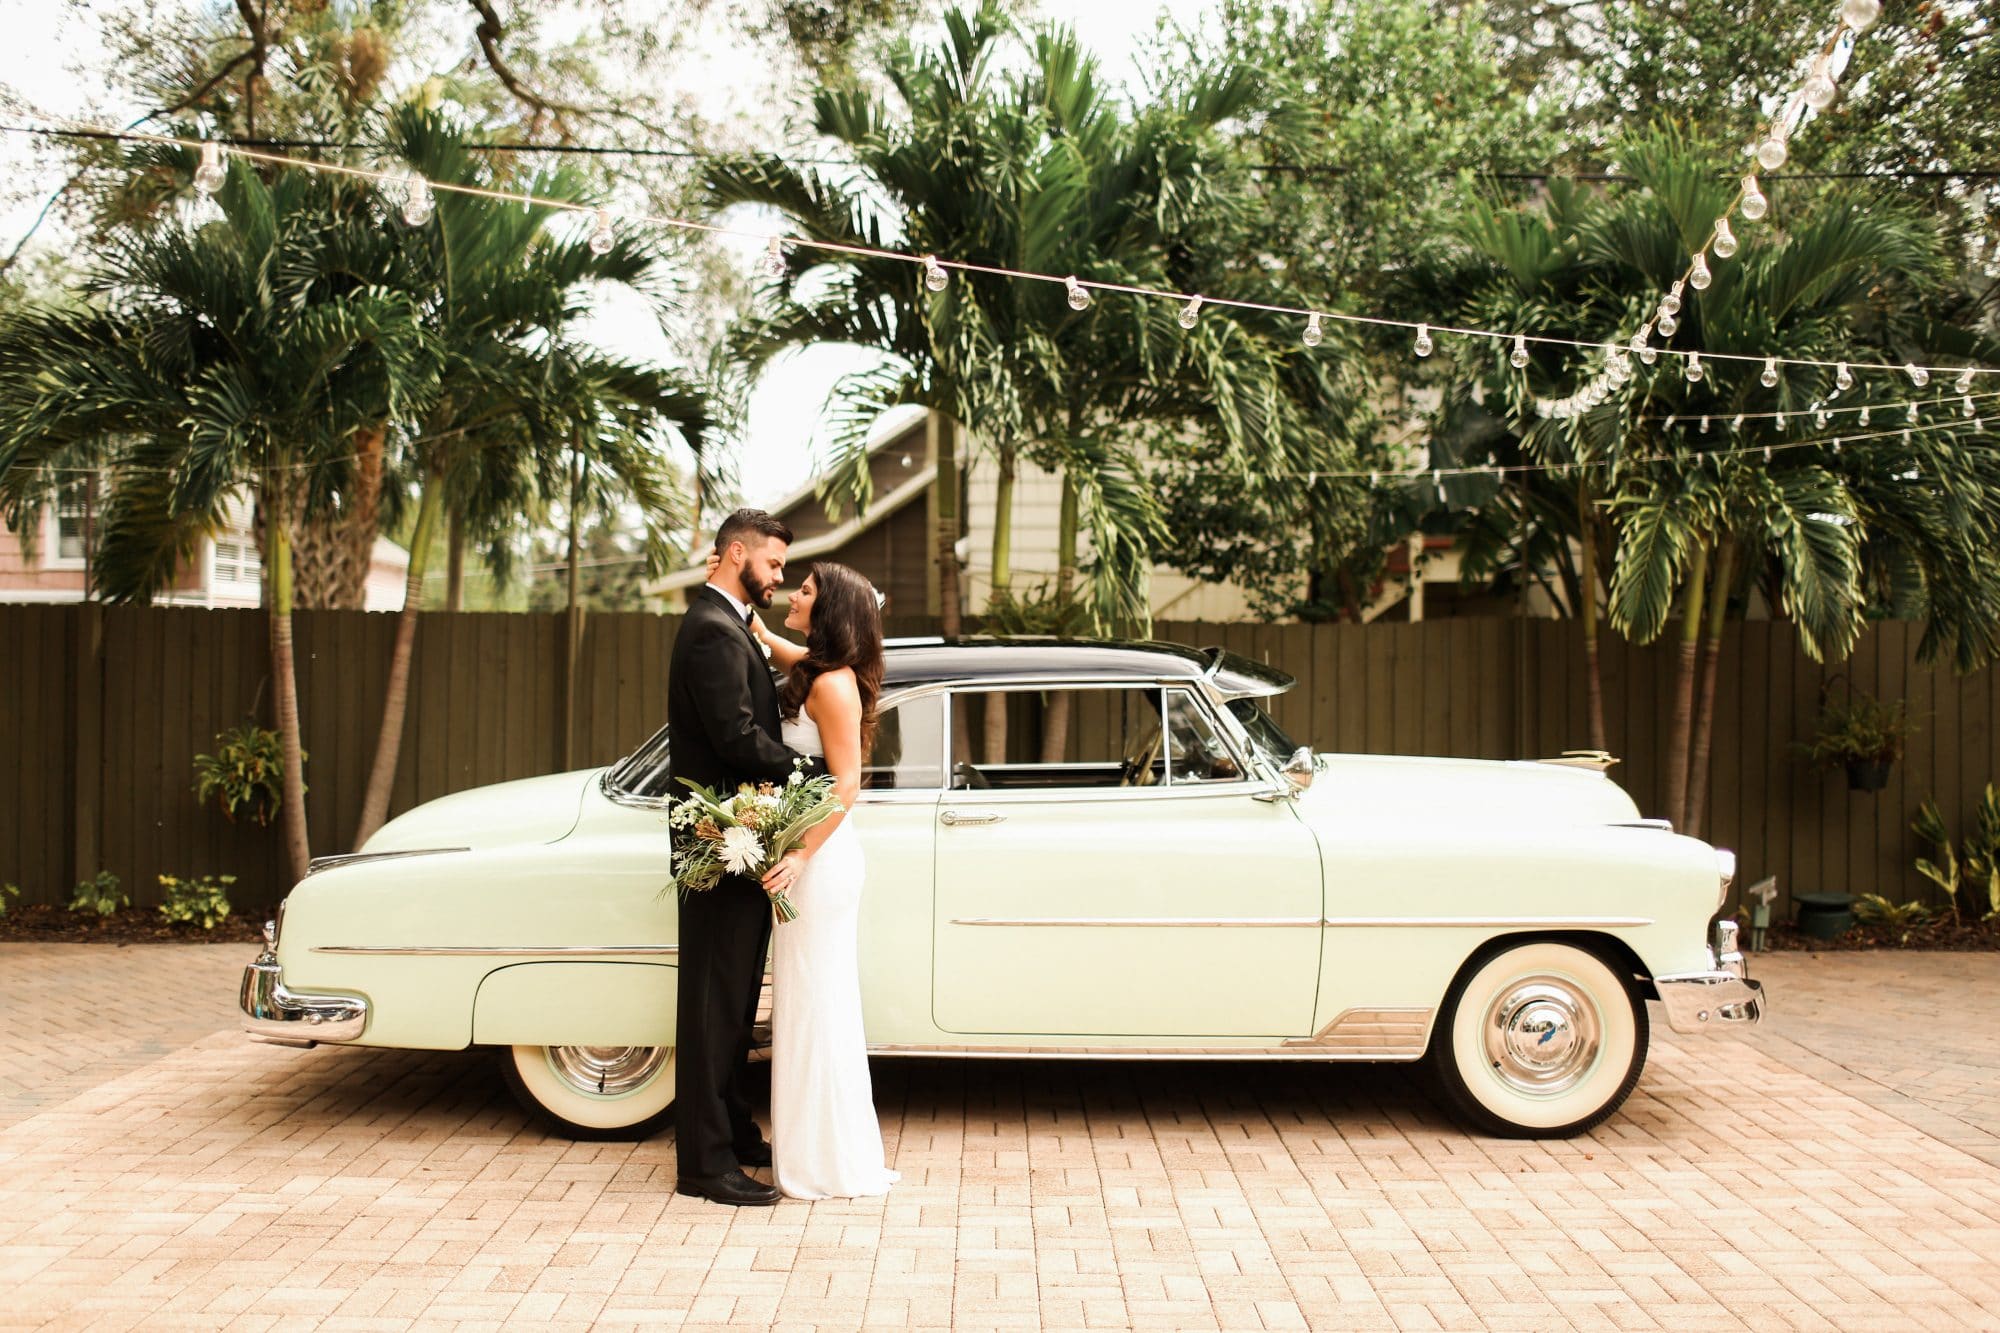 The Veranda at Thornton Park - bride and groom next to classic car at a historic wedding venue in florida